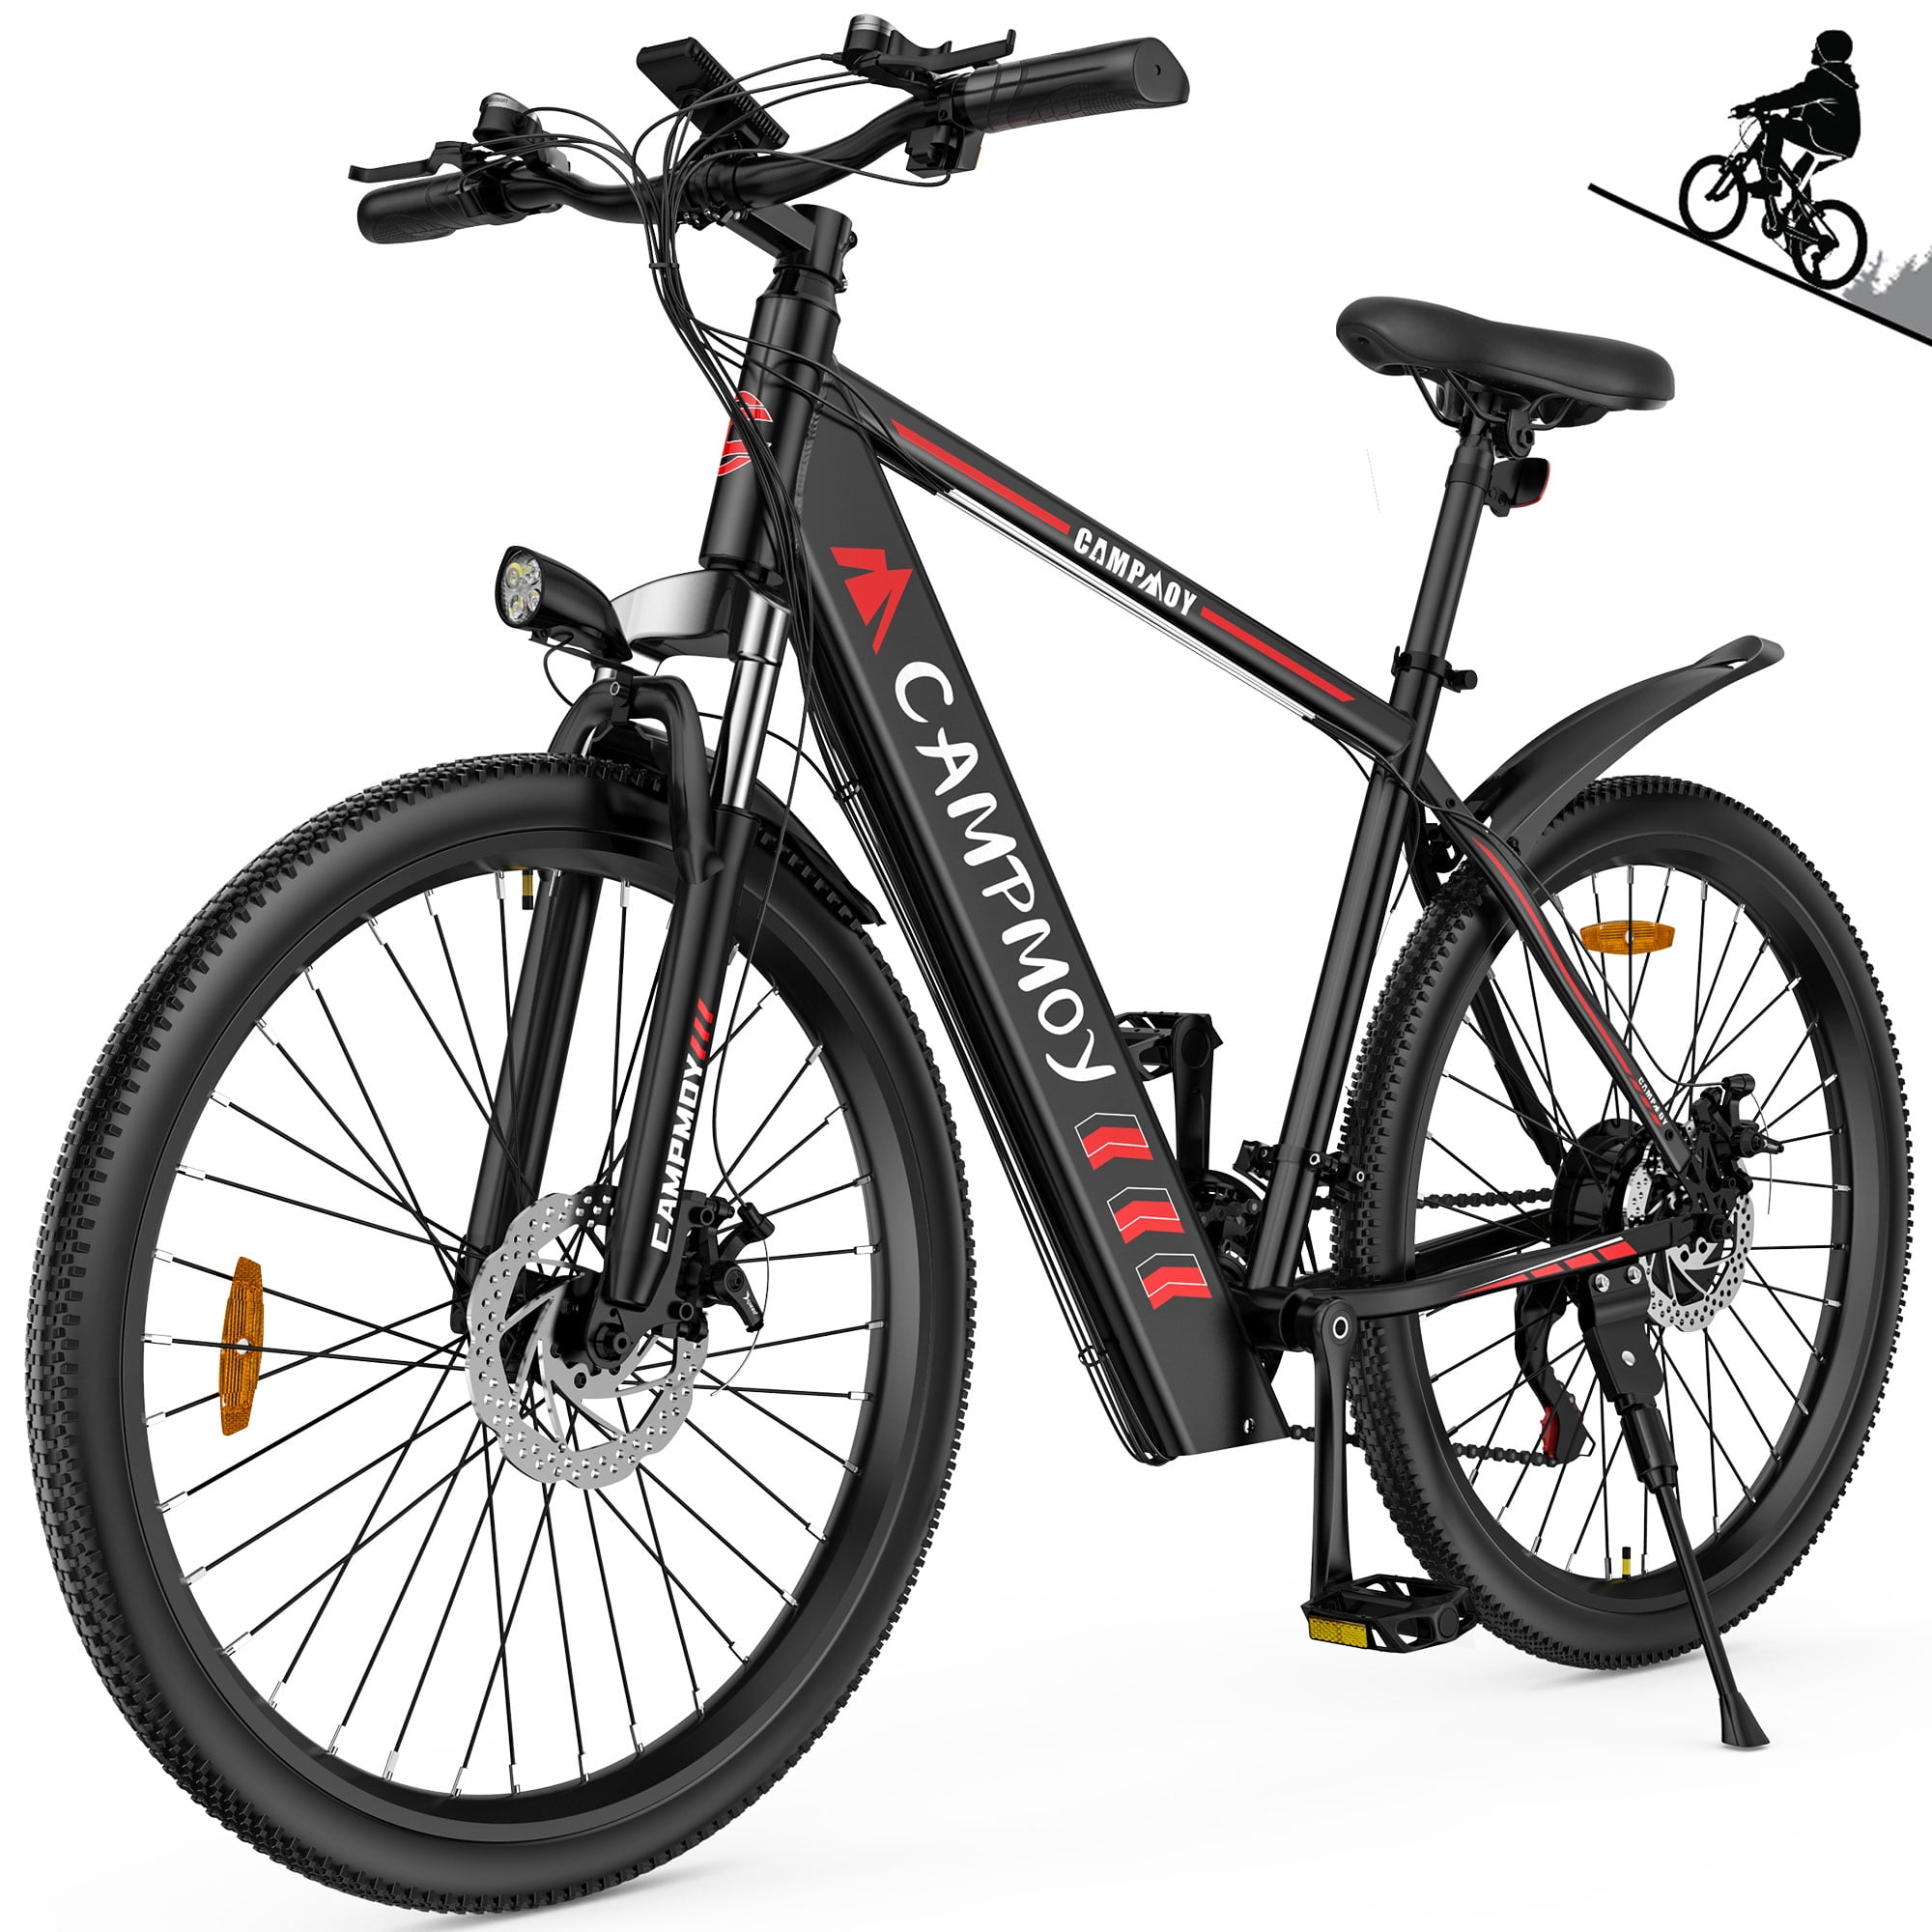 Campmoy Electric Mountain Bike, LCD Display, Built-in 36V Battery，350W Motor, 21- Speed Transmission, 5 Levels Electric/Pedal Assist Modes, 331LBS, Great for Commuting, Free Bike Lock